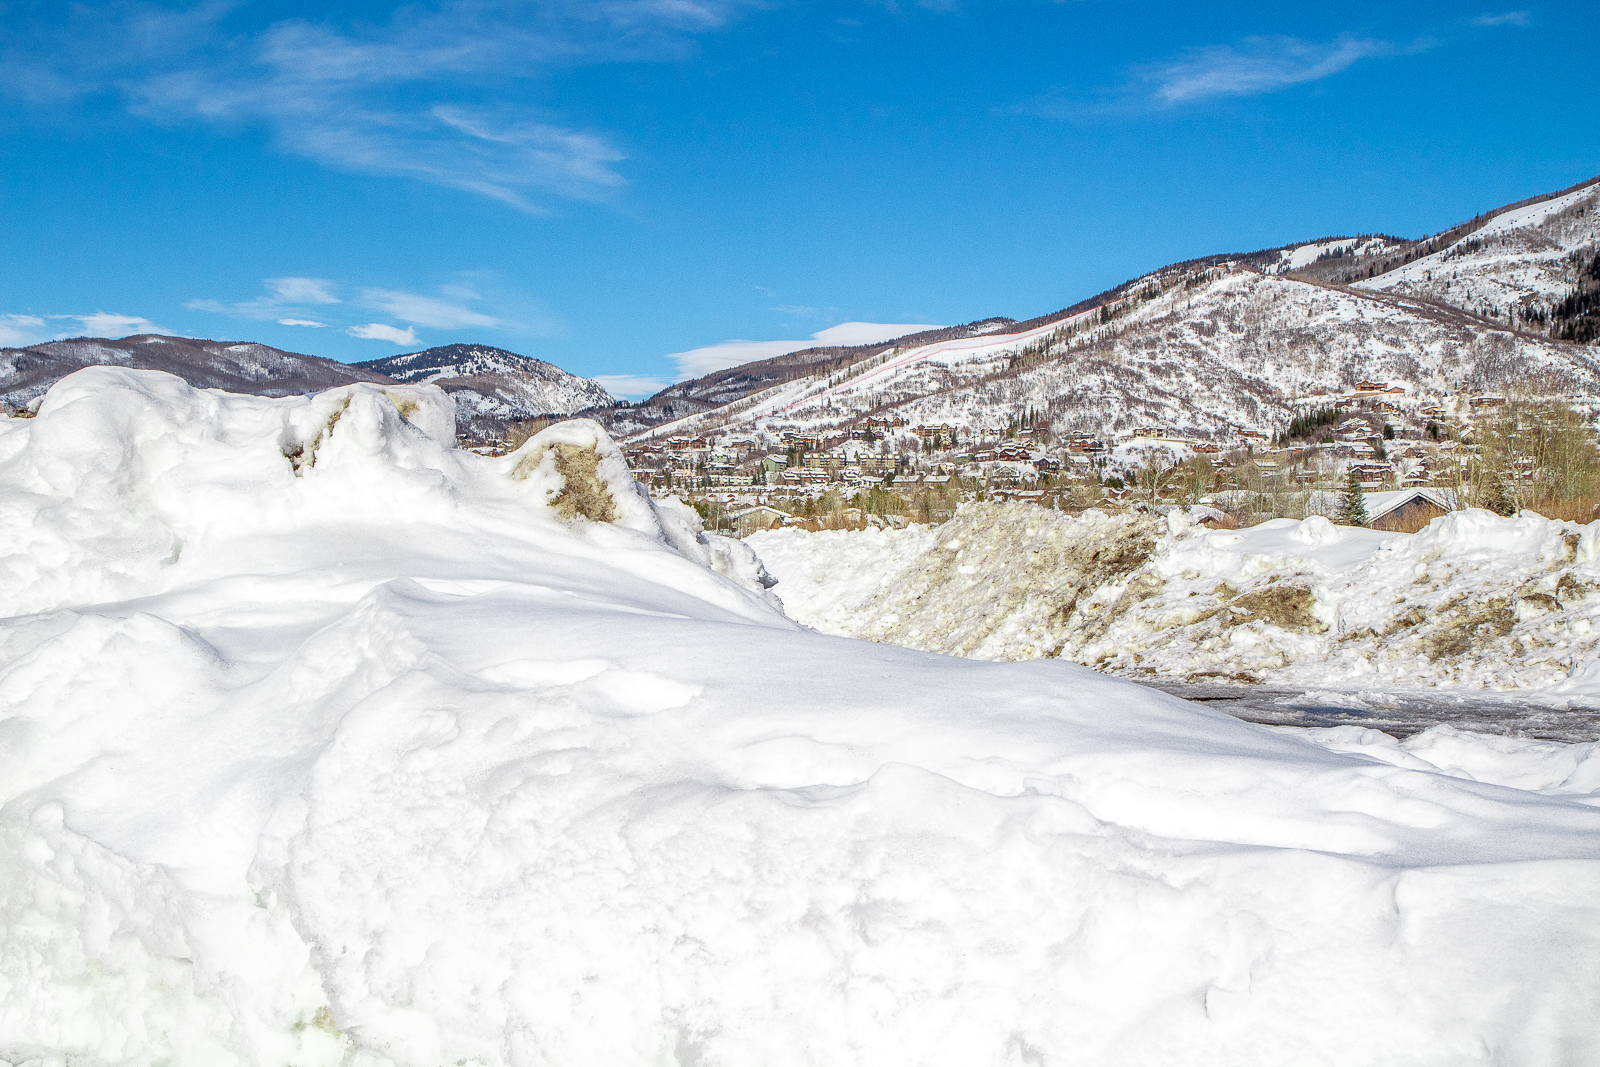 Things to do in Steamboat Springs in the winter